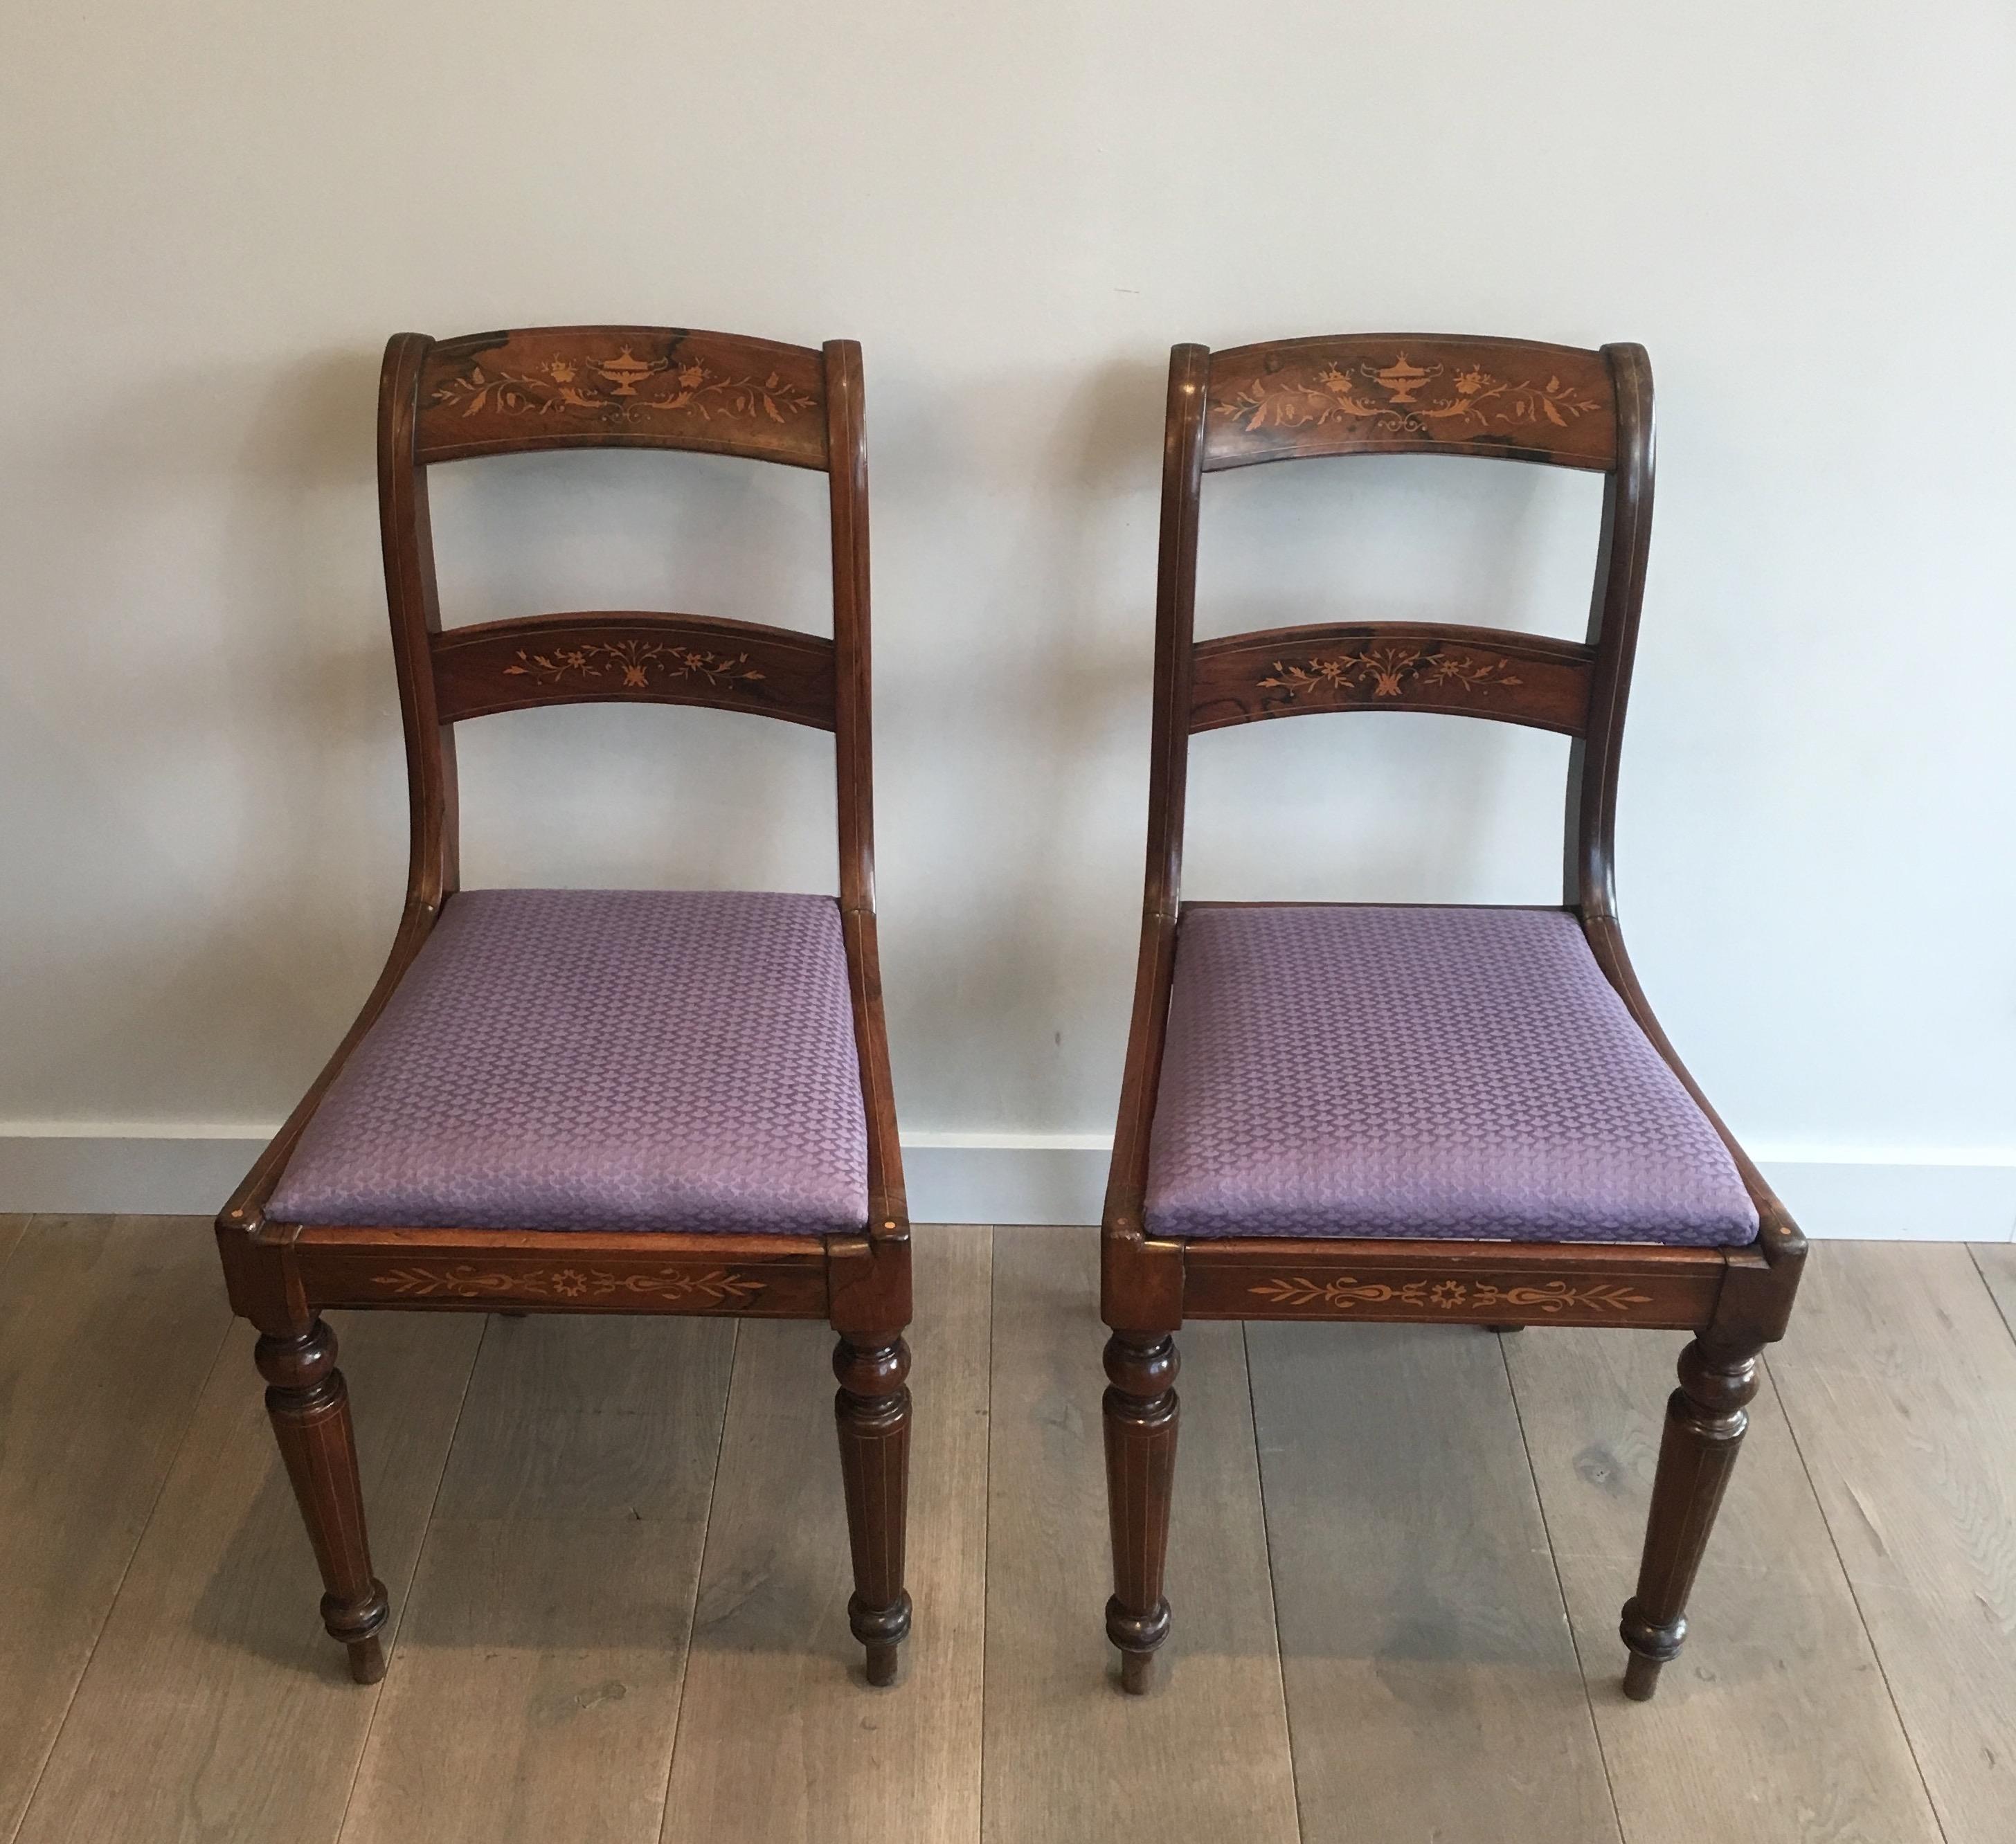 This beautiful pair of chairs are made of rosewood with lemon tree incrustations. This is a beautiful work. These chairs are French, 19th century, Charles X Period. This model is attributed to famous French cabinetmaker Jeanselme.
  